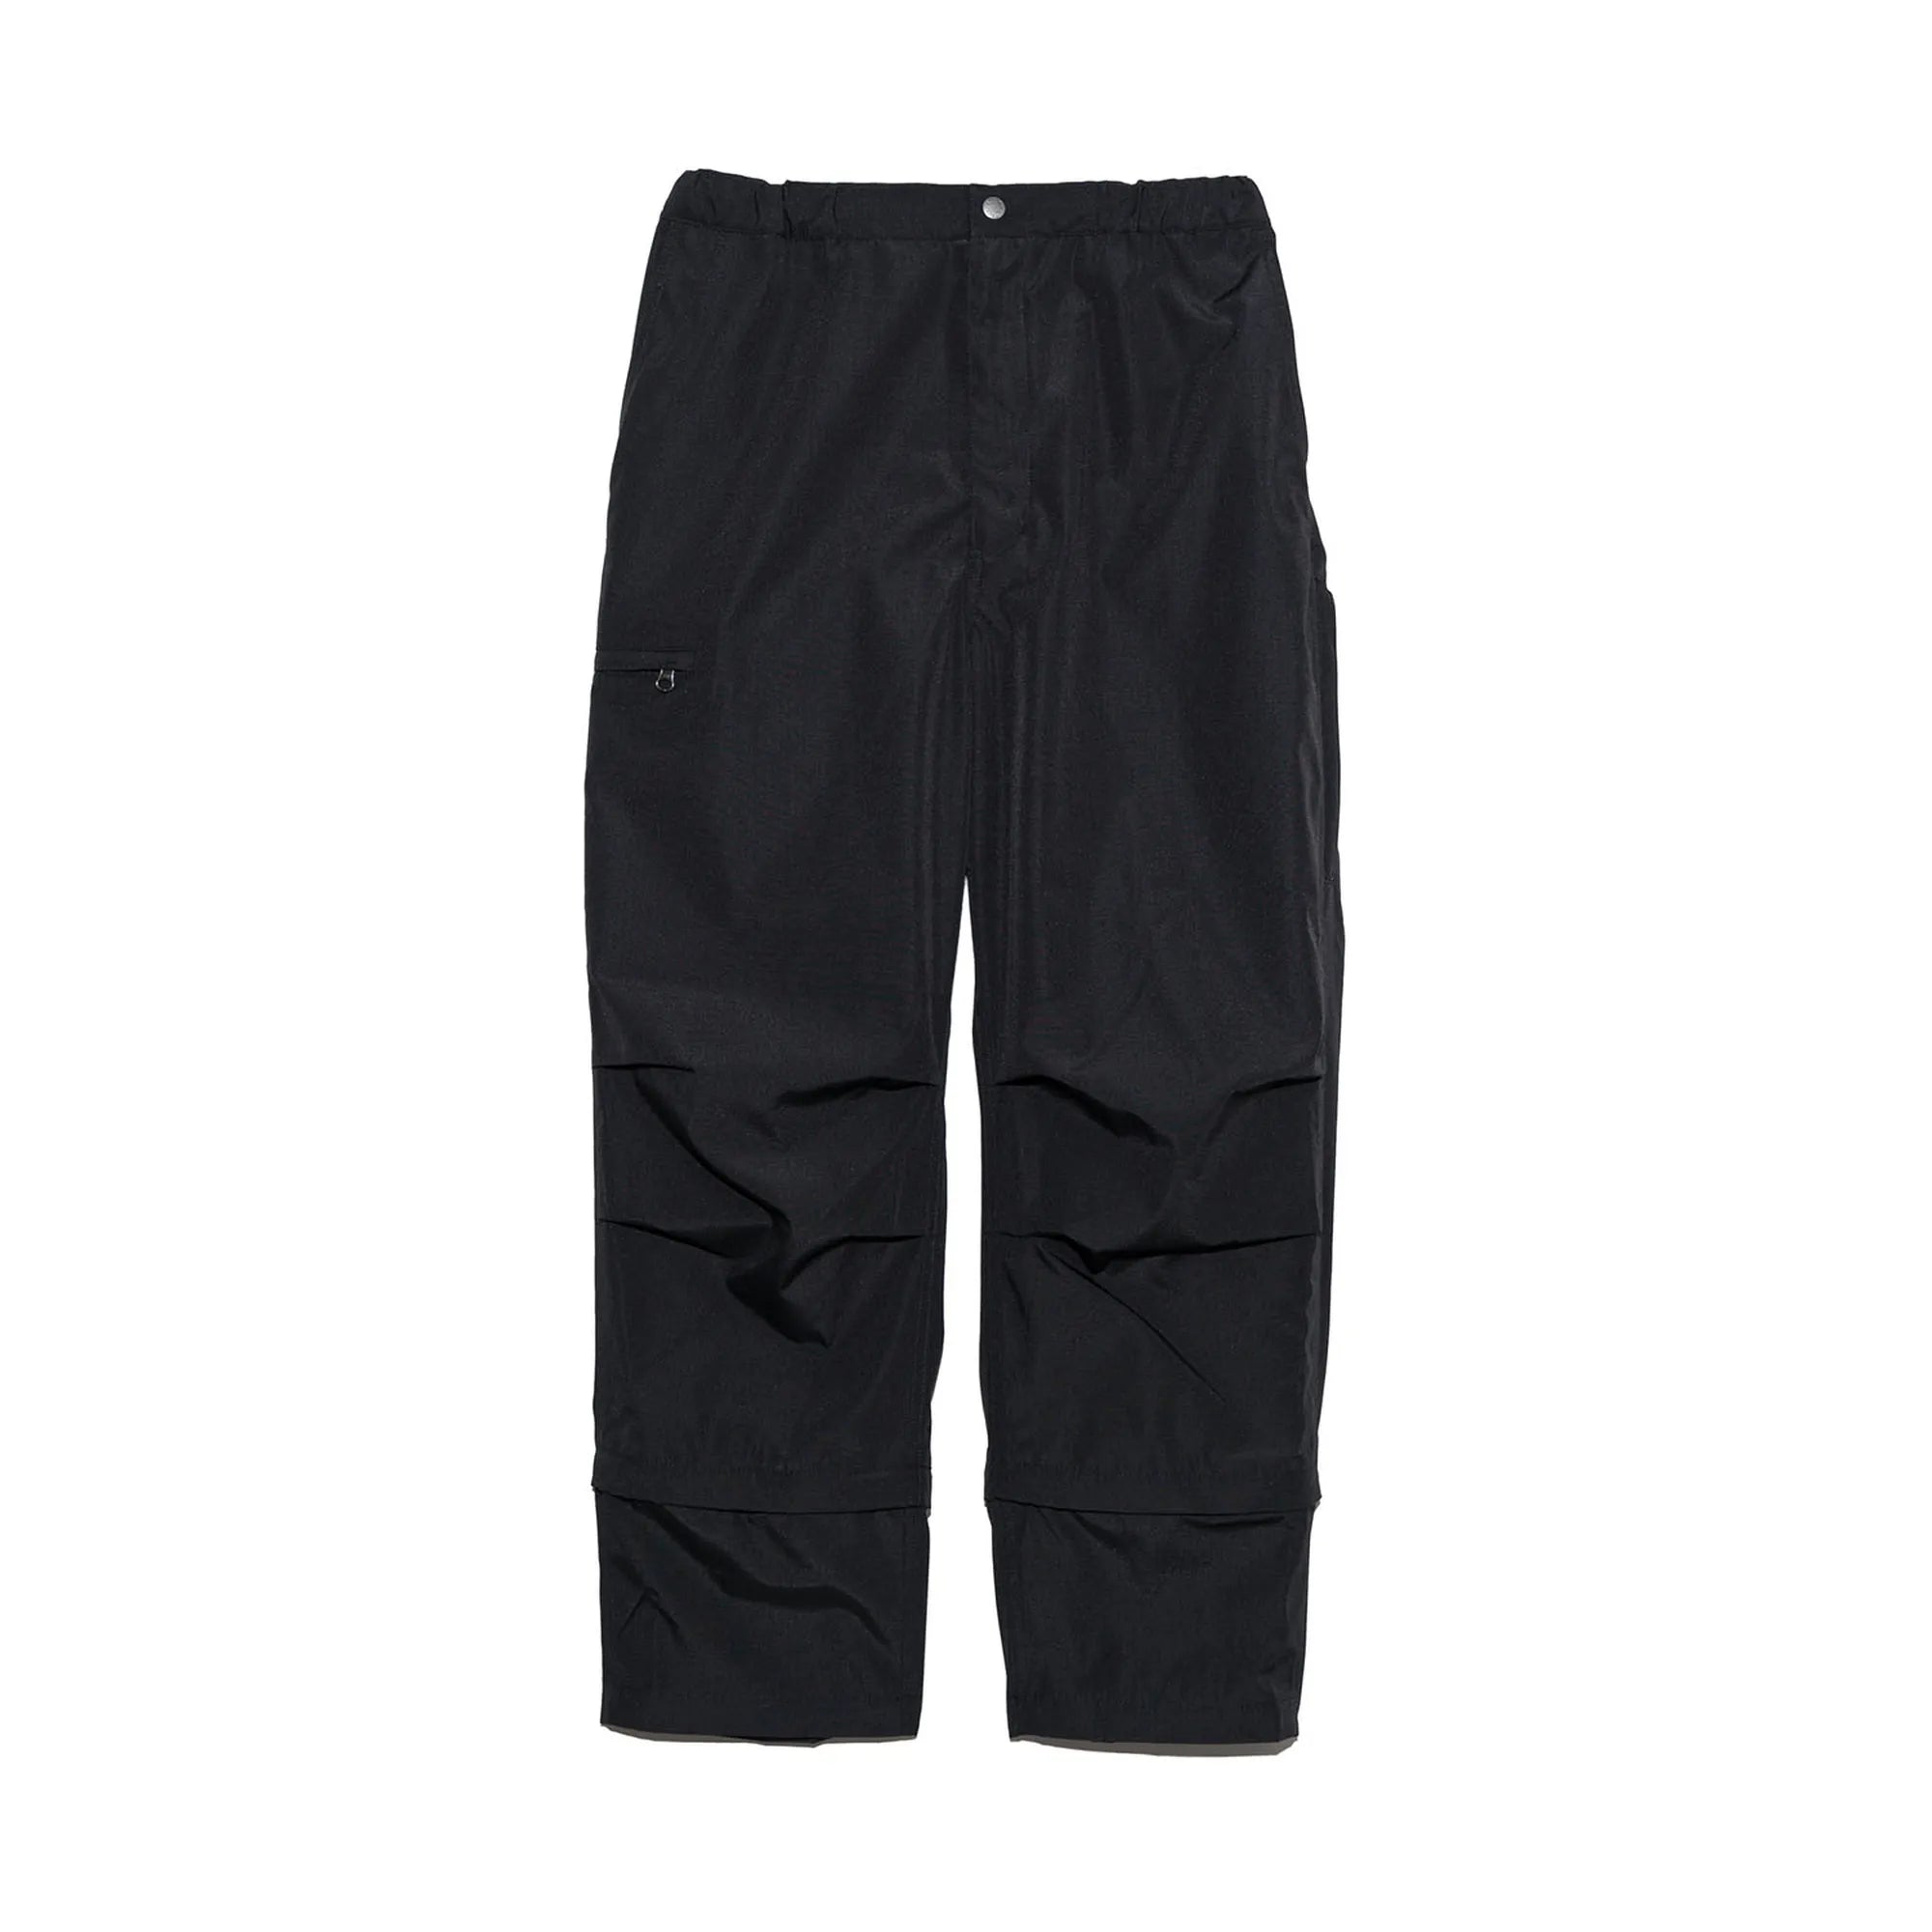 THE NORTH FACE PURPLE LABEL / MOUNTAIN WIND PANTS